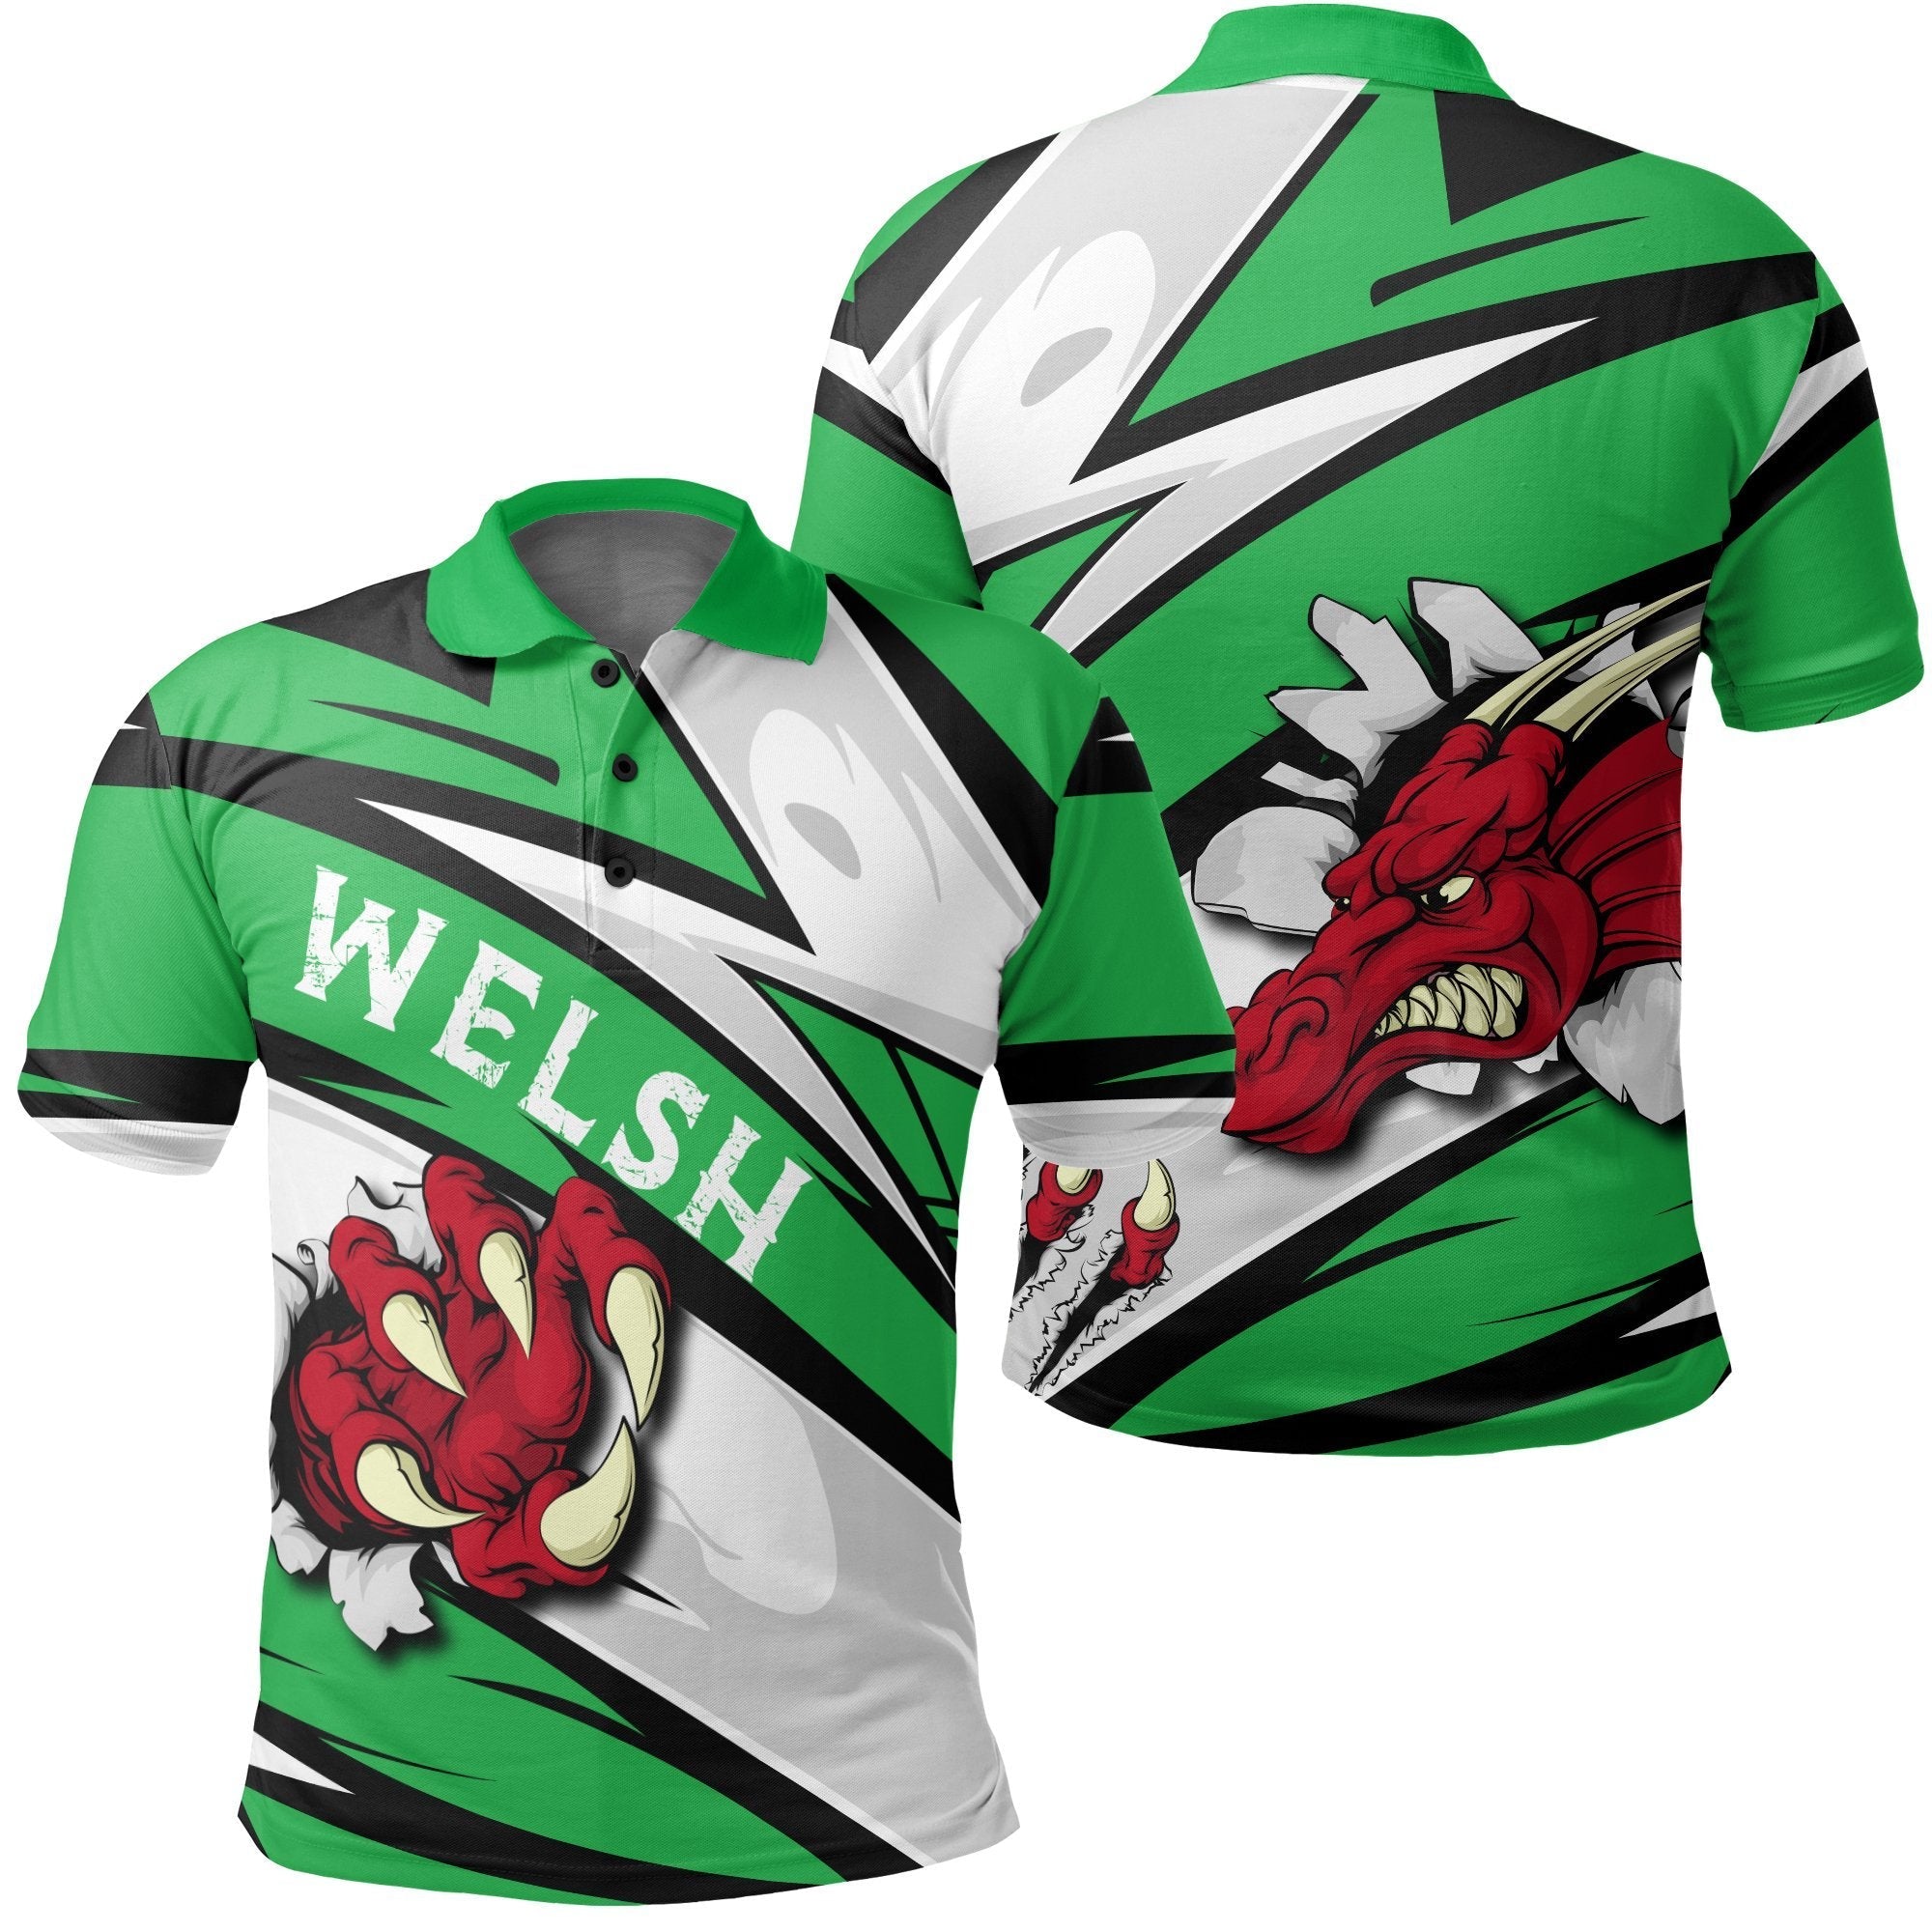 wales-dragon-of-welsh-polo-shirt-lode-style